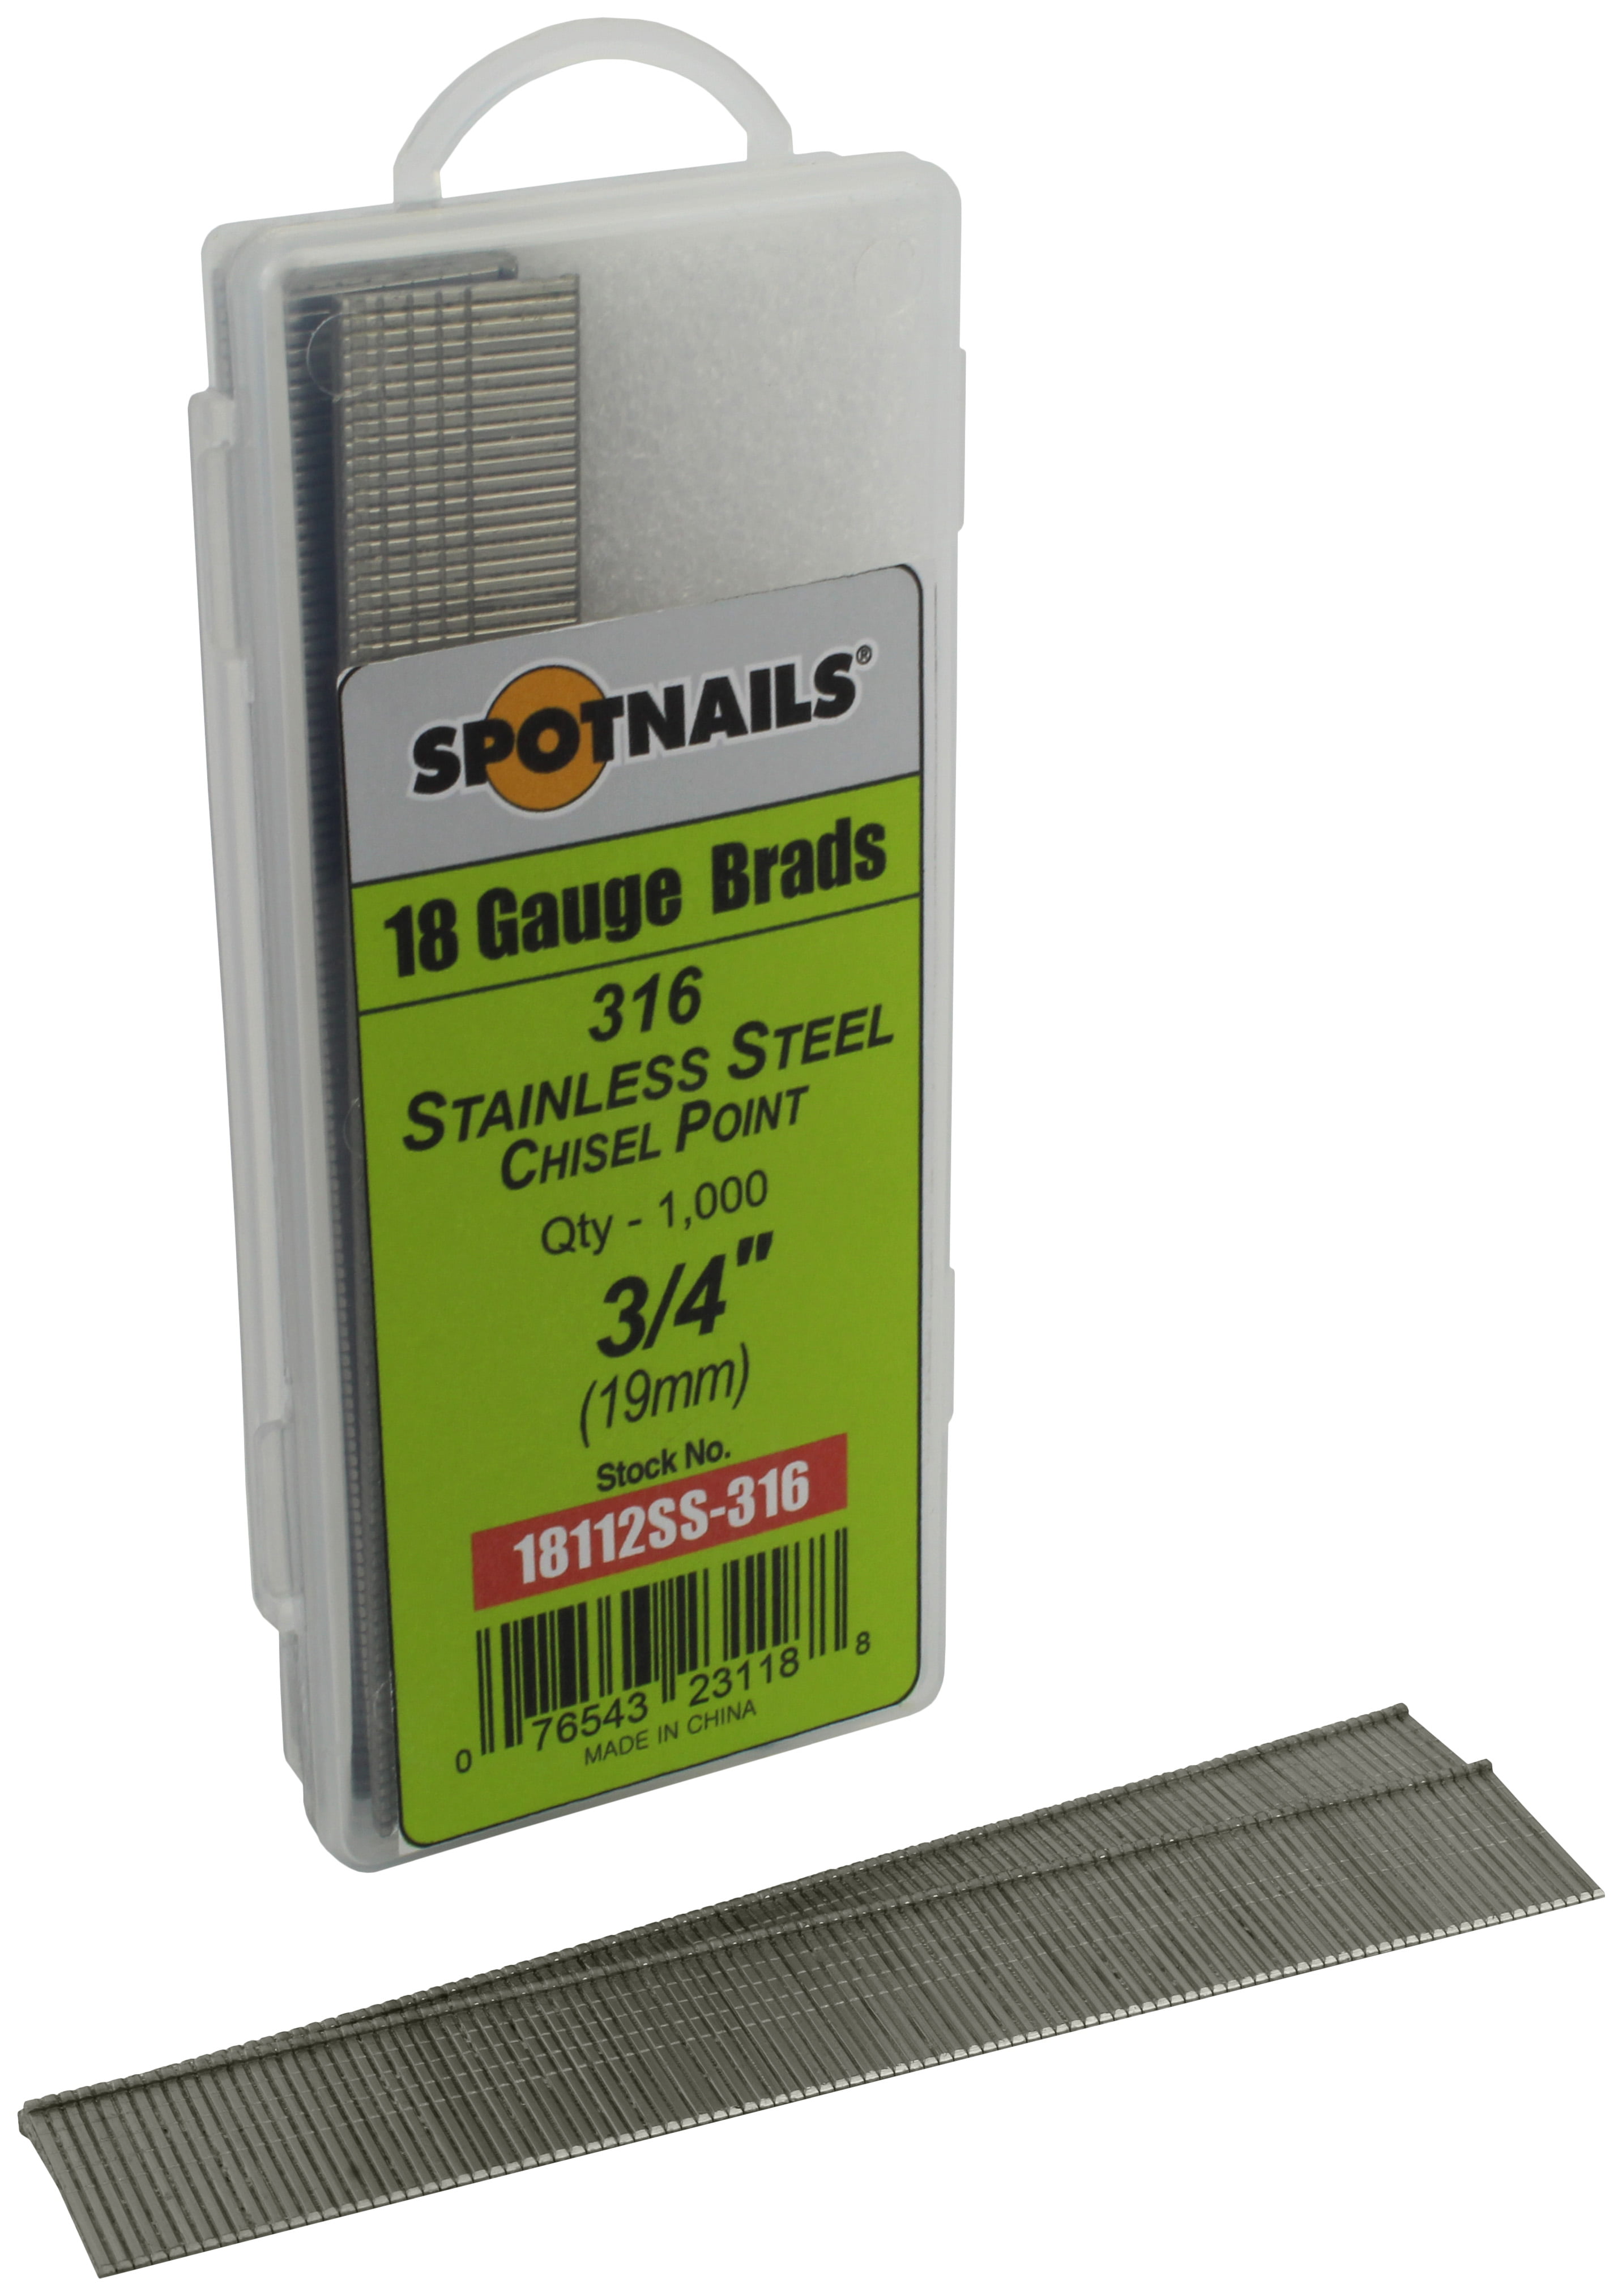 5,000/Box Spotnails 18512SS-316 3/4 in 316 Stainless Steel 18 Gauge AX Style Brads